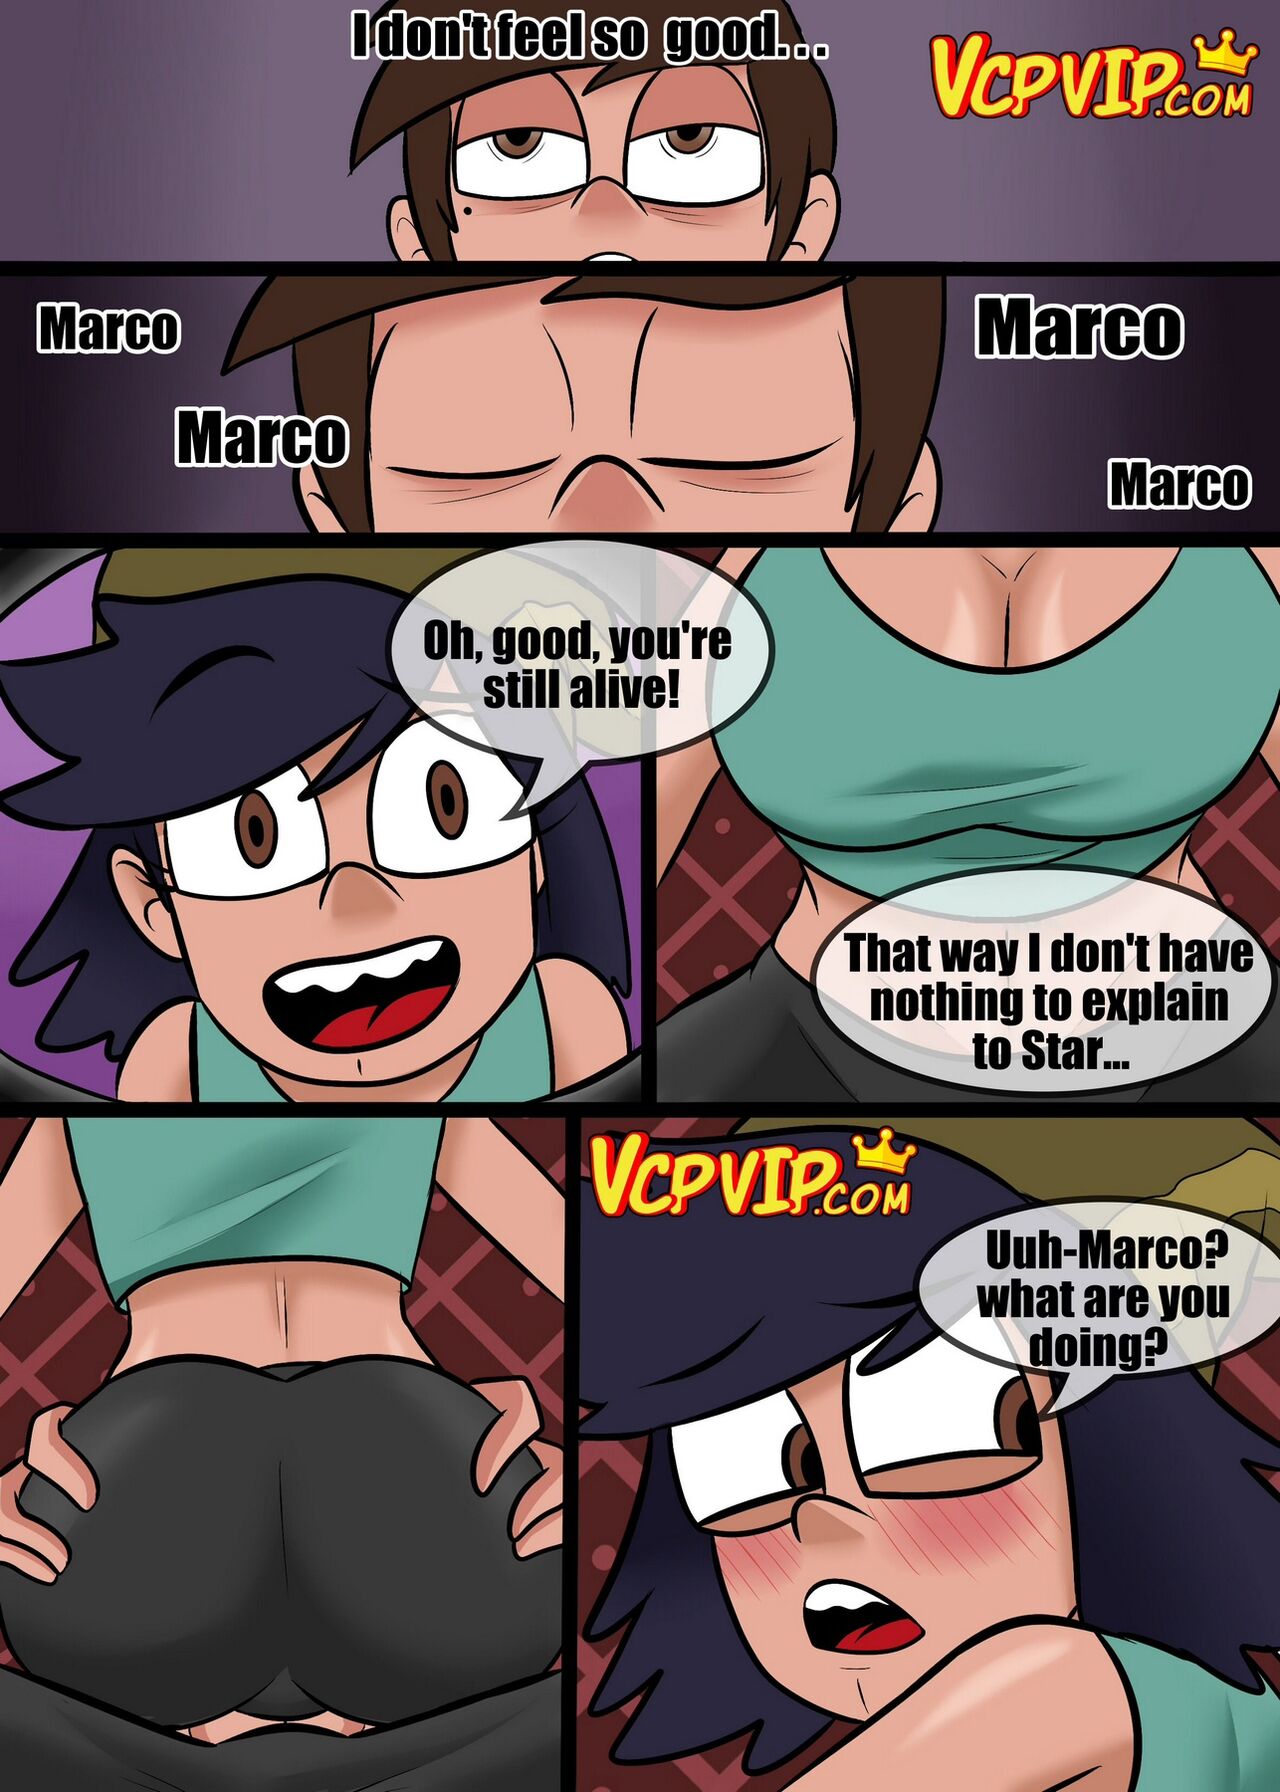 Marco vs the Forces of Lust by ZaicoMaster14 (English)